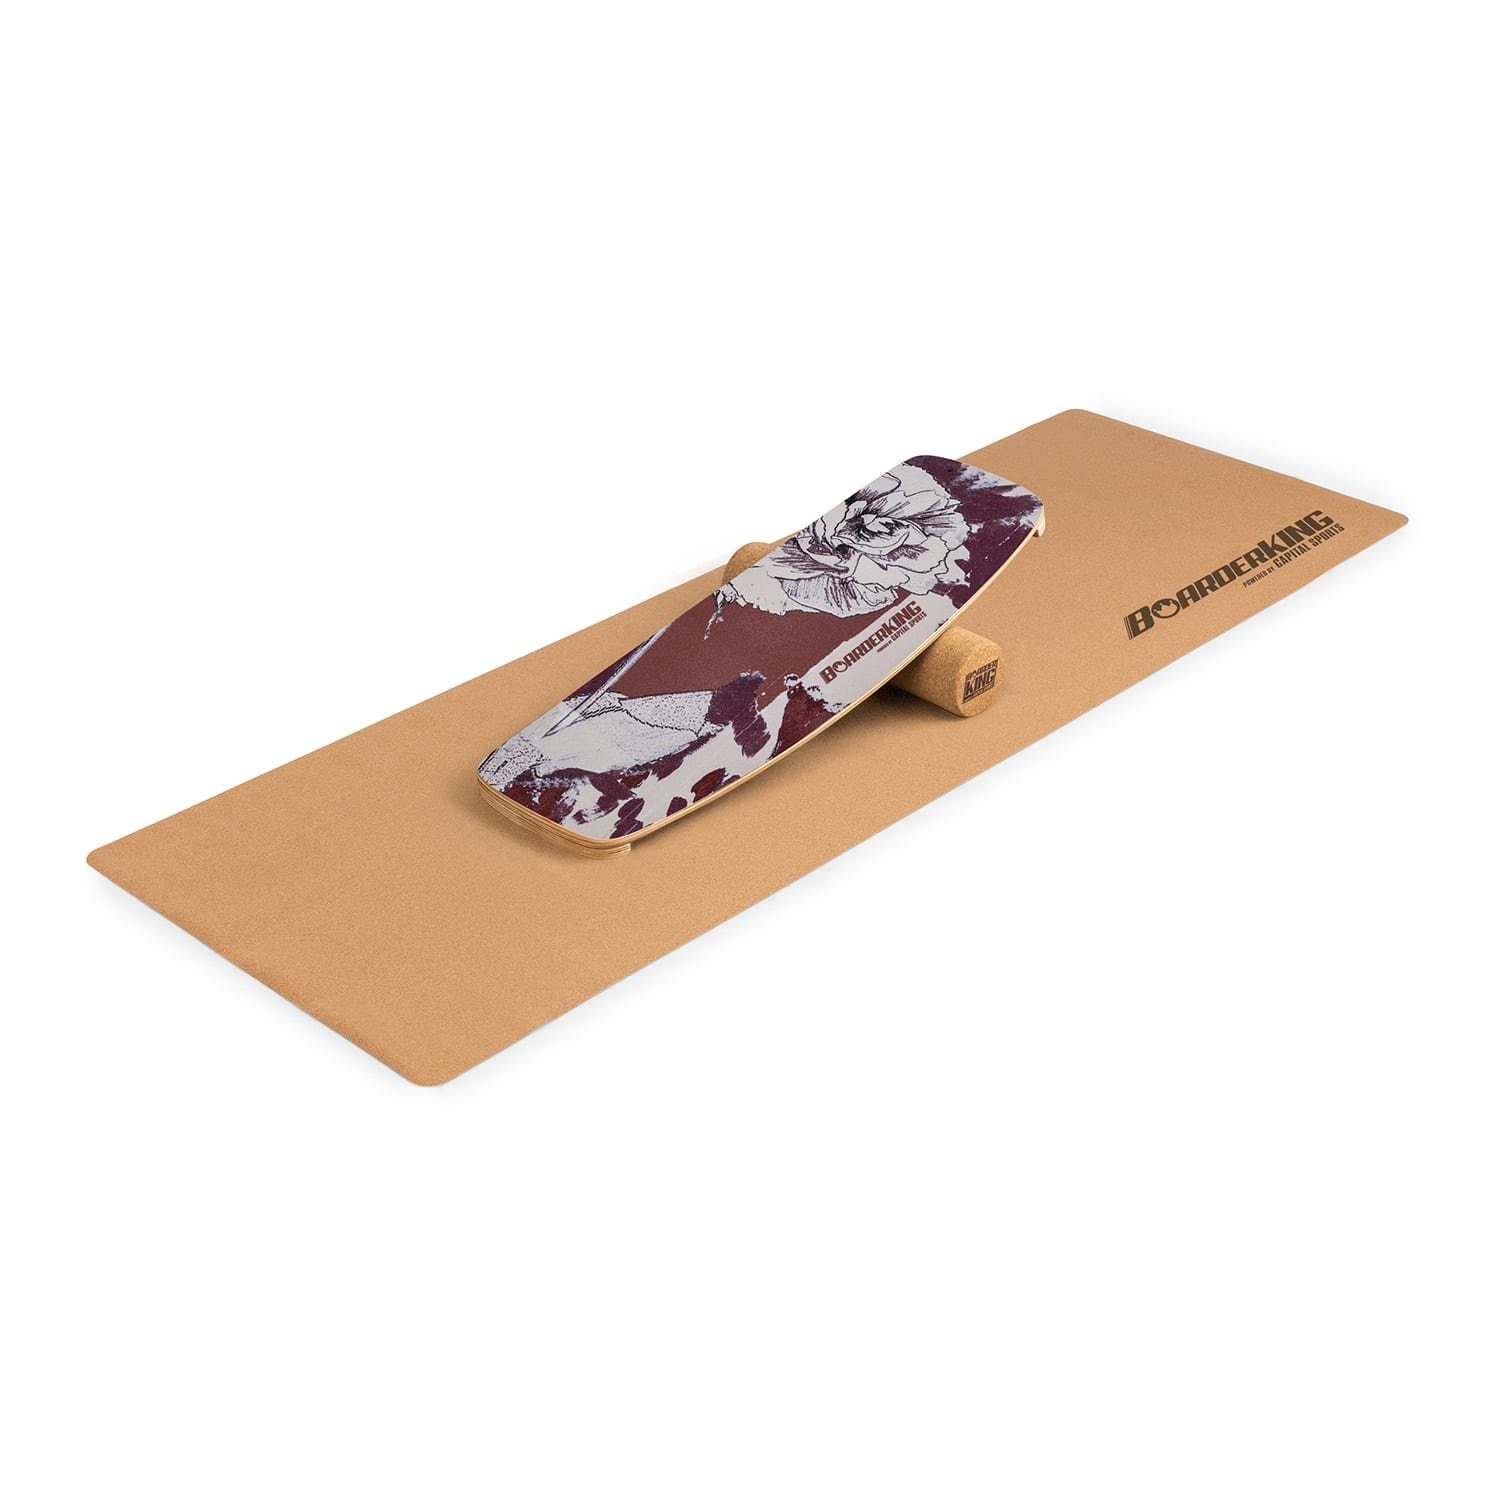 BoarderKING Ball Curved Indoorboard Floral Half